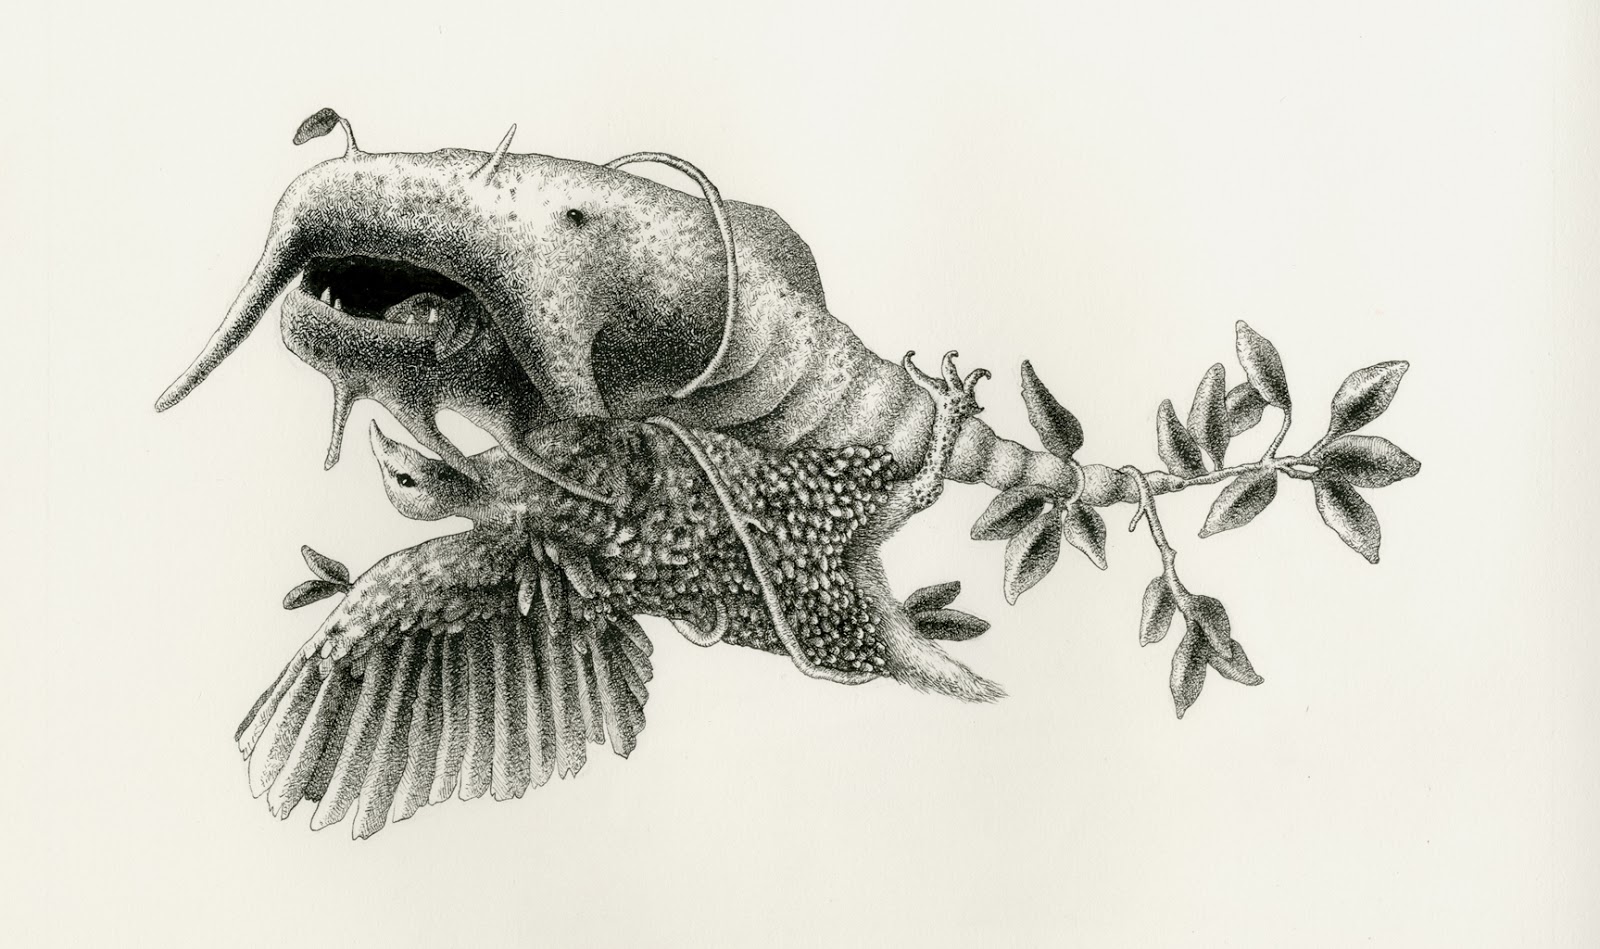 Ruby Rudnick: Flora and fauna drawings